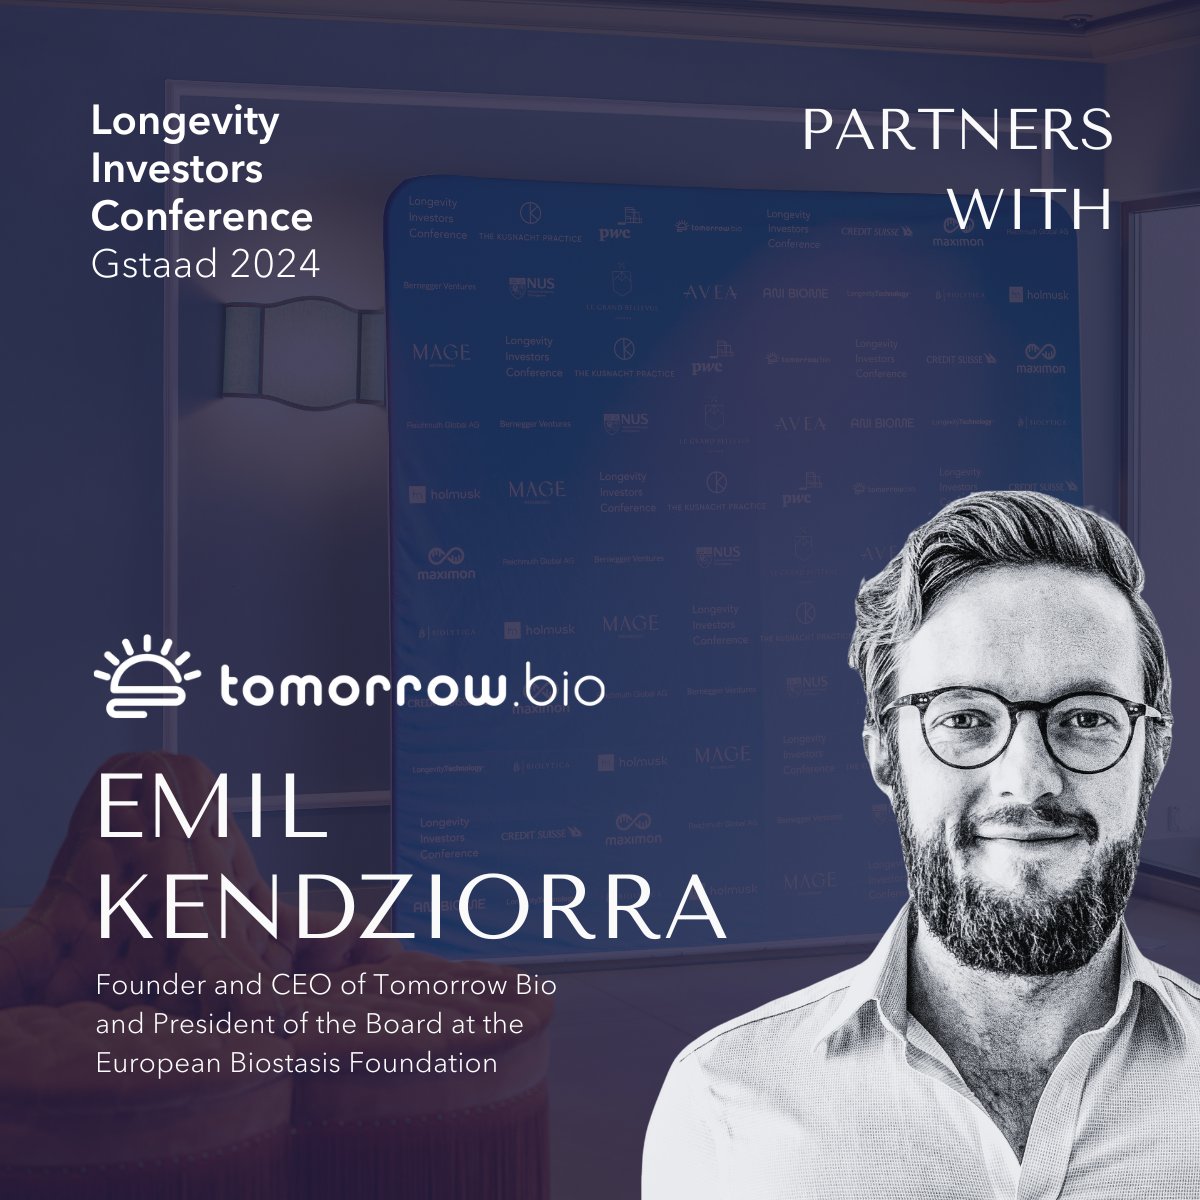 We're thrilled to announce @tomorrowbio as a partner of the Longevity Investors Conference 2024! 🌟 Meet us as we welcome their Founder & CEO, @emilkendziorra, as one of our esteemed speakers! 🎤 Proud to continue our long-term partnership since 2022. Let's shape the future of…